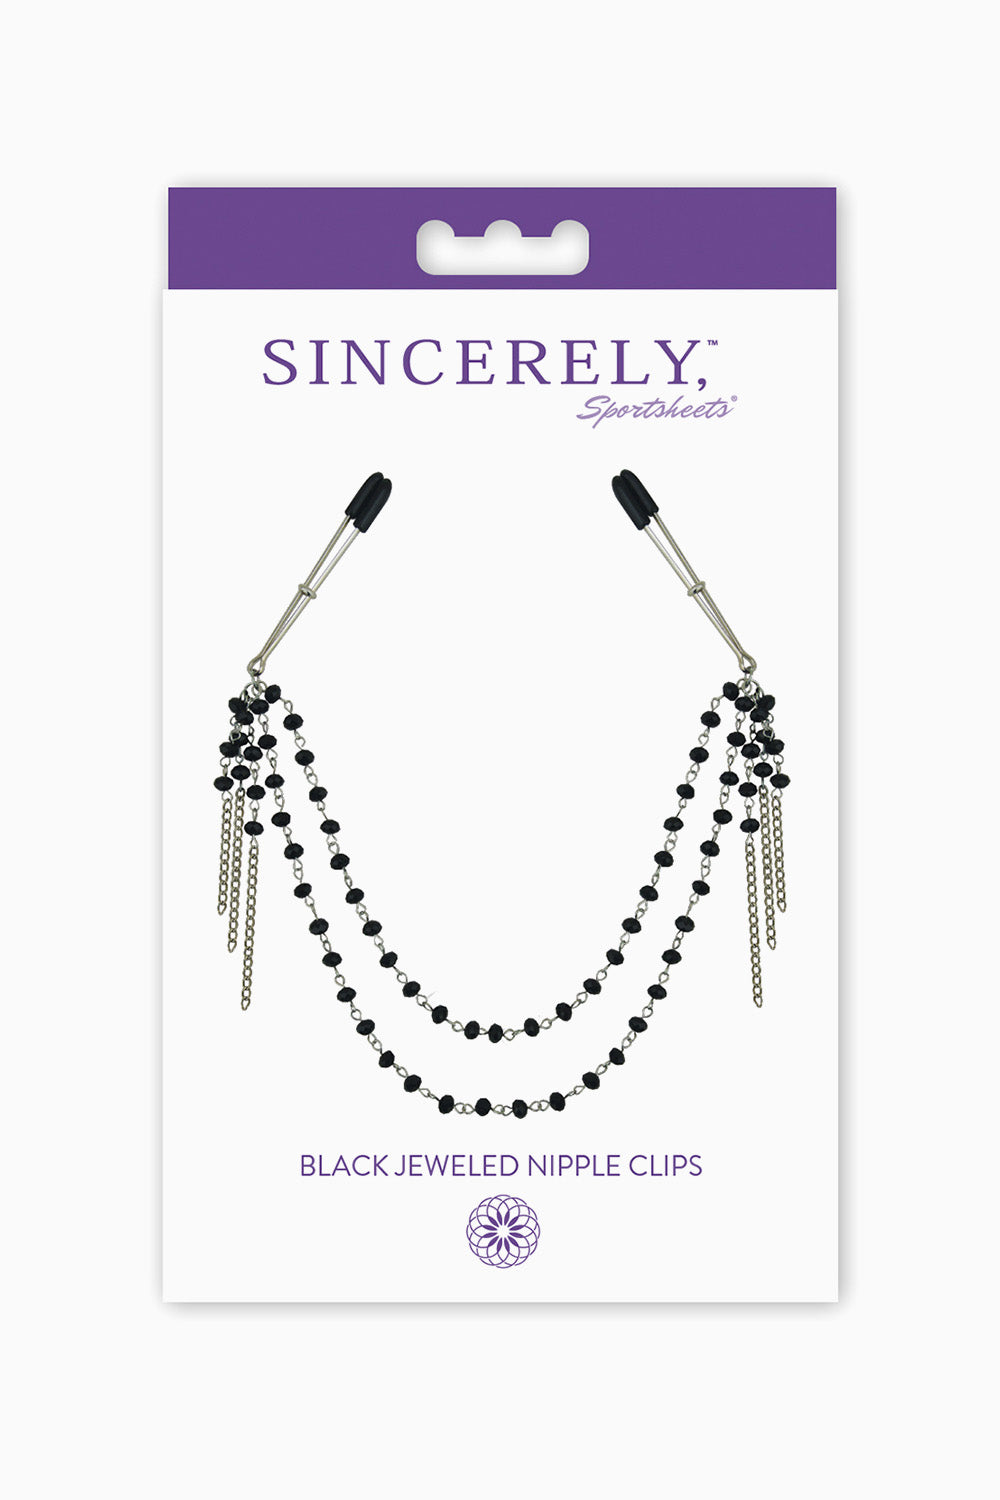 Sportsheets Sincerely Black Jewelled Nipple Clips